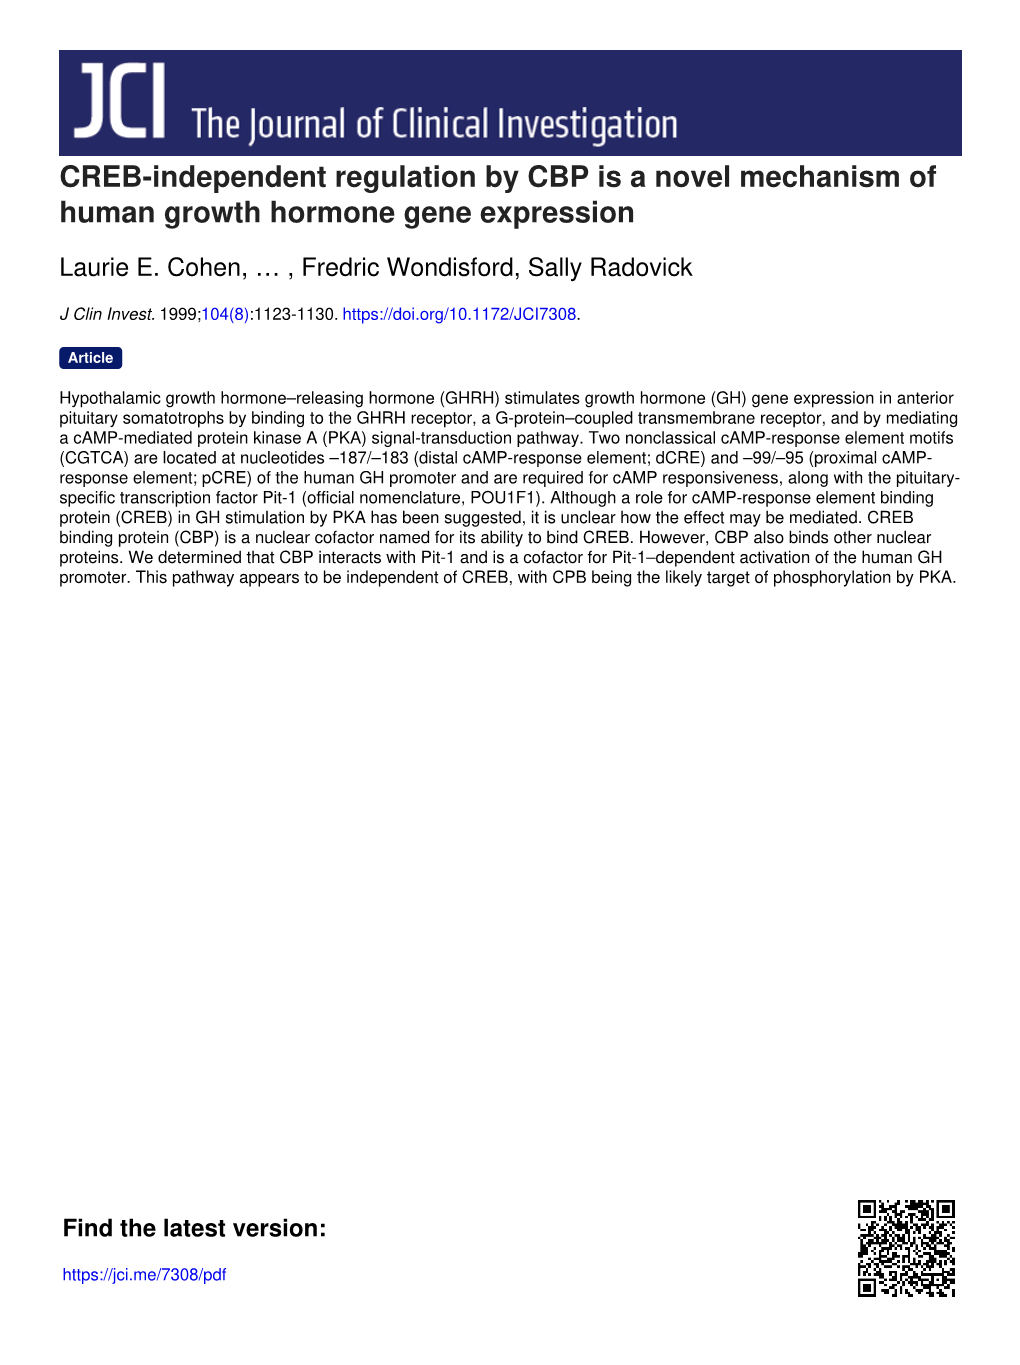 CREB-Independent Regulation by CBP Is a Novel Mechanism of Human Growth Hormone Gene Expression